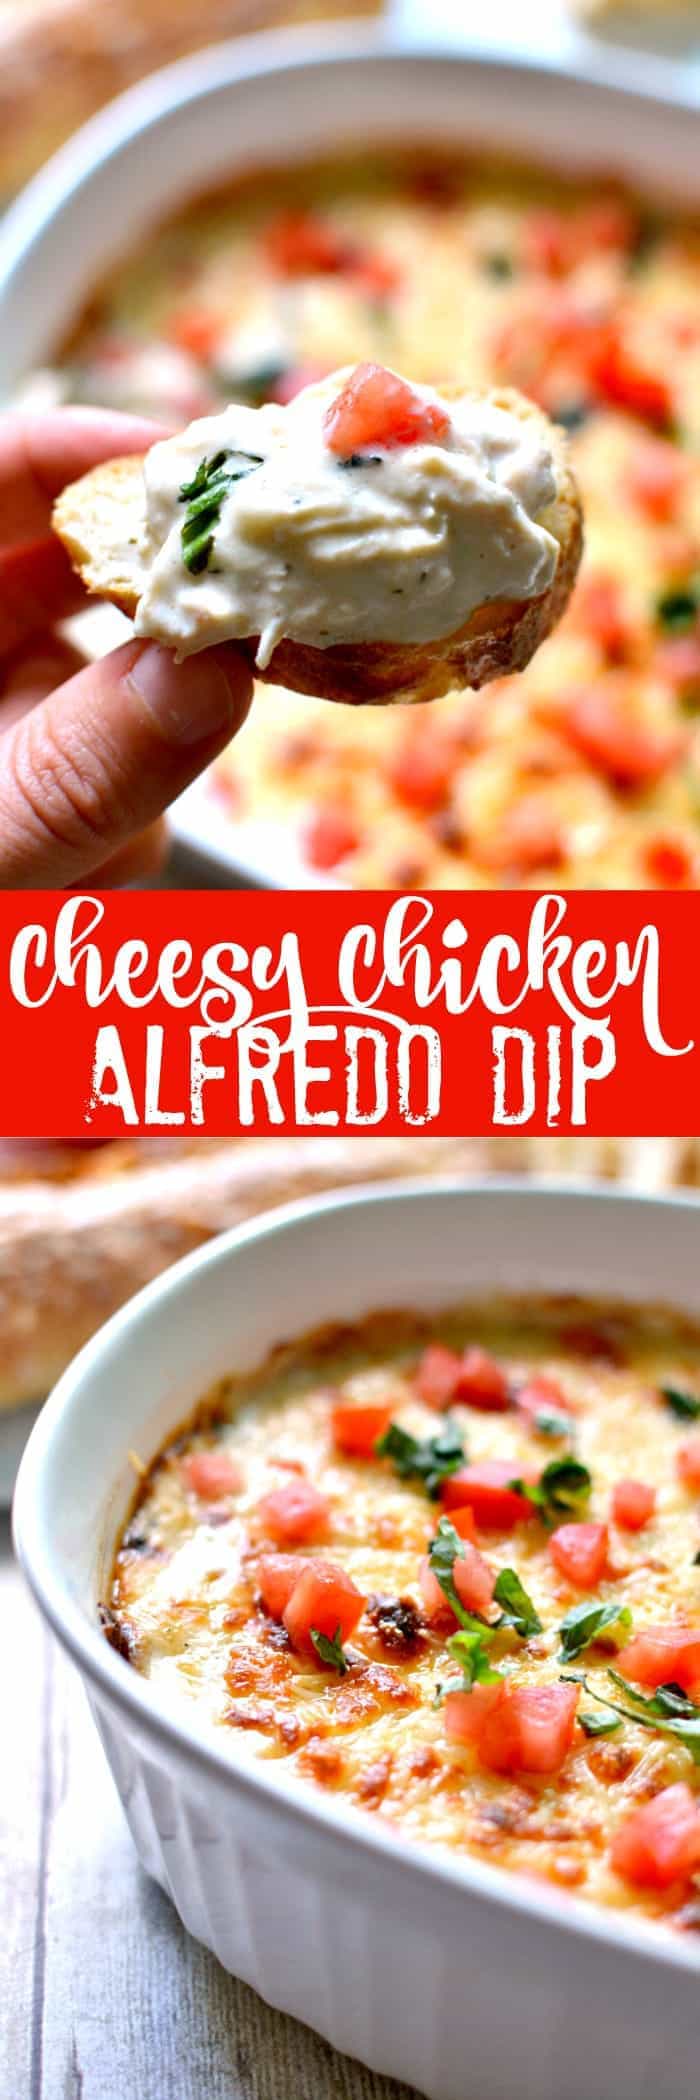 Cheesy Chicken Alfredo Dip - ready in 30 minutes and perfect for game day!